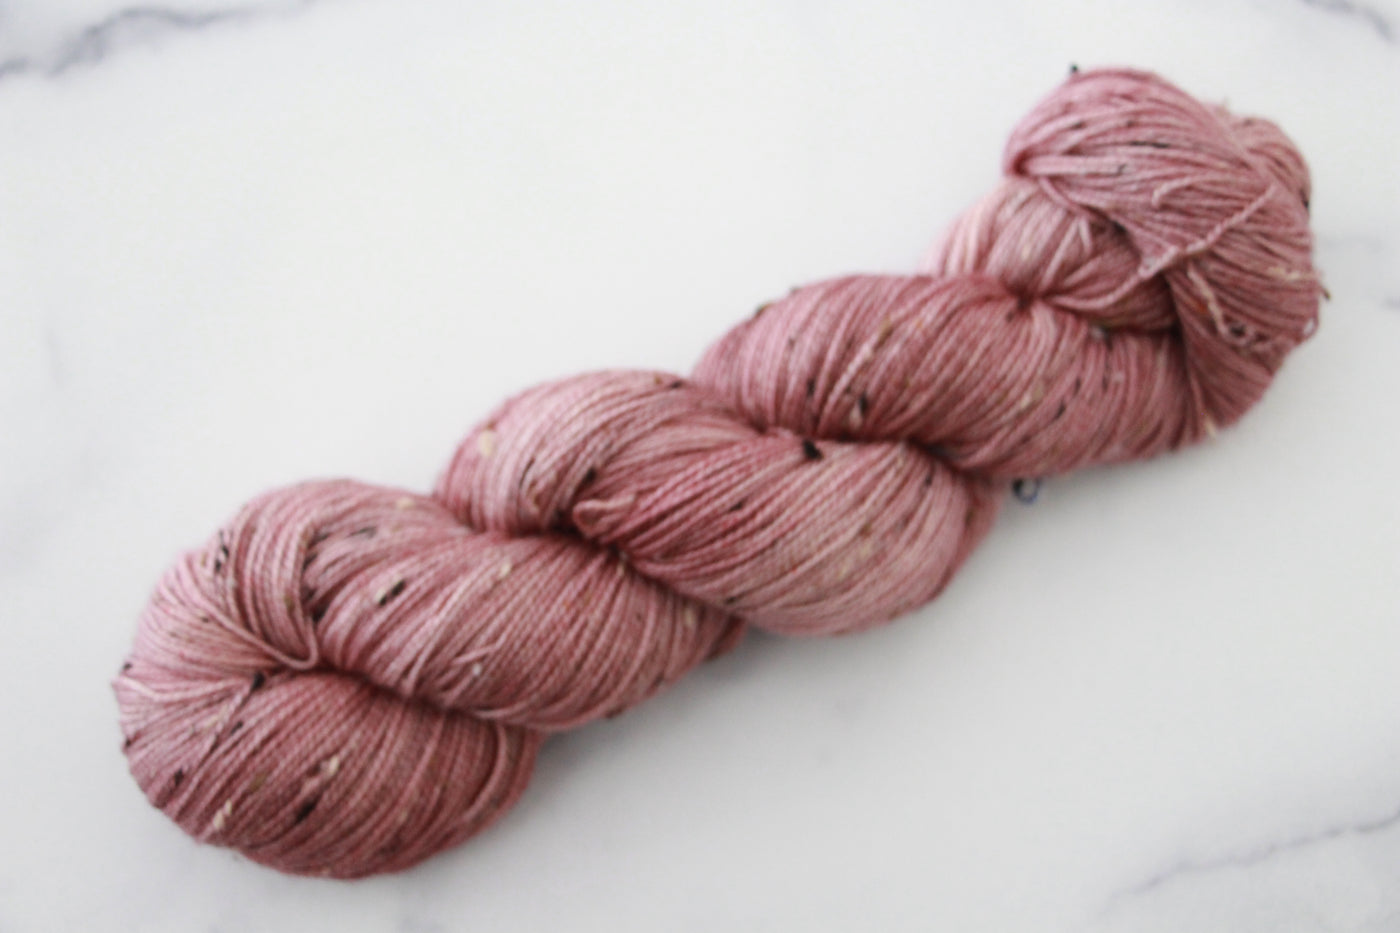 Mauvelous - Donegal Tweed Fingering Weight Yarn